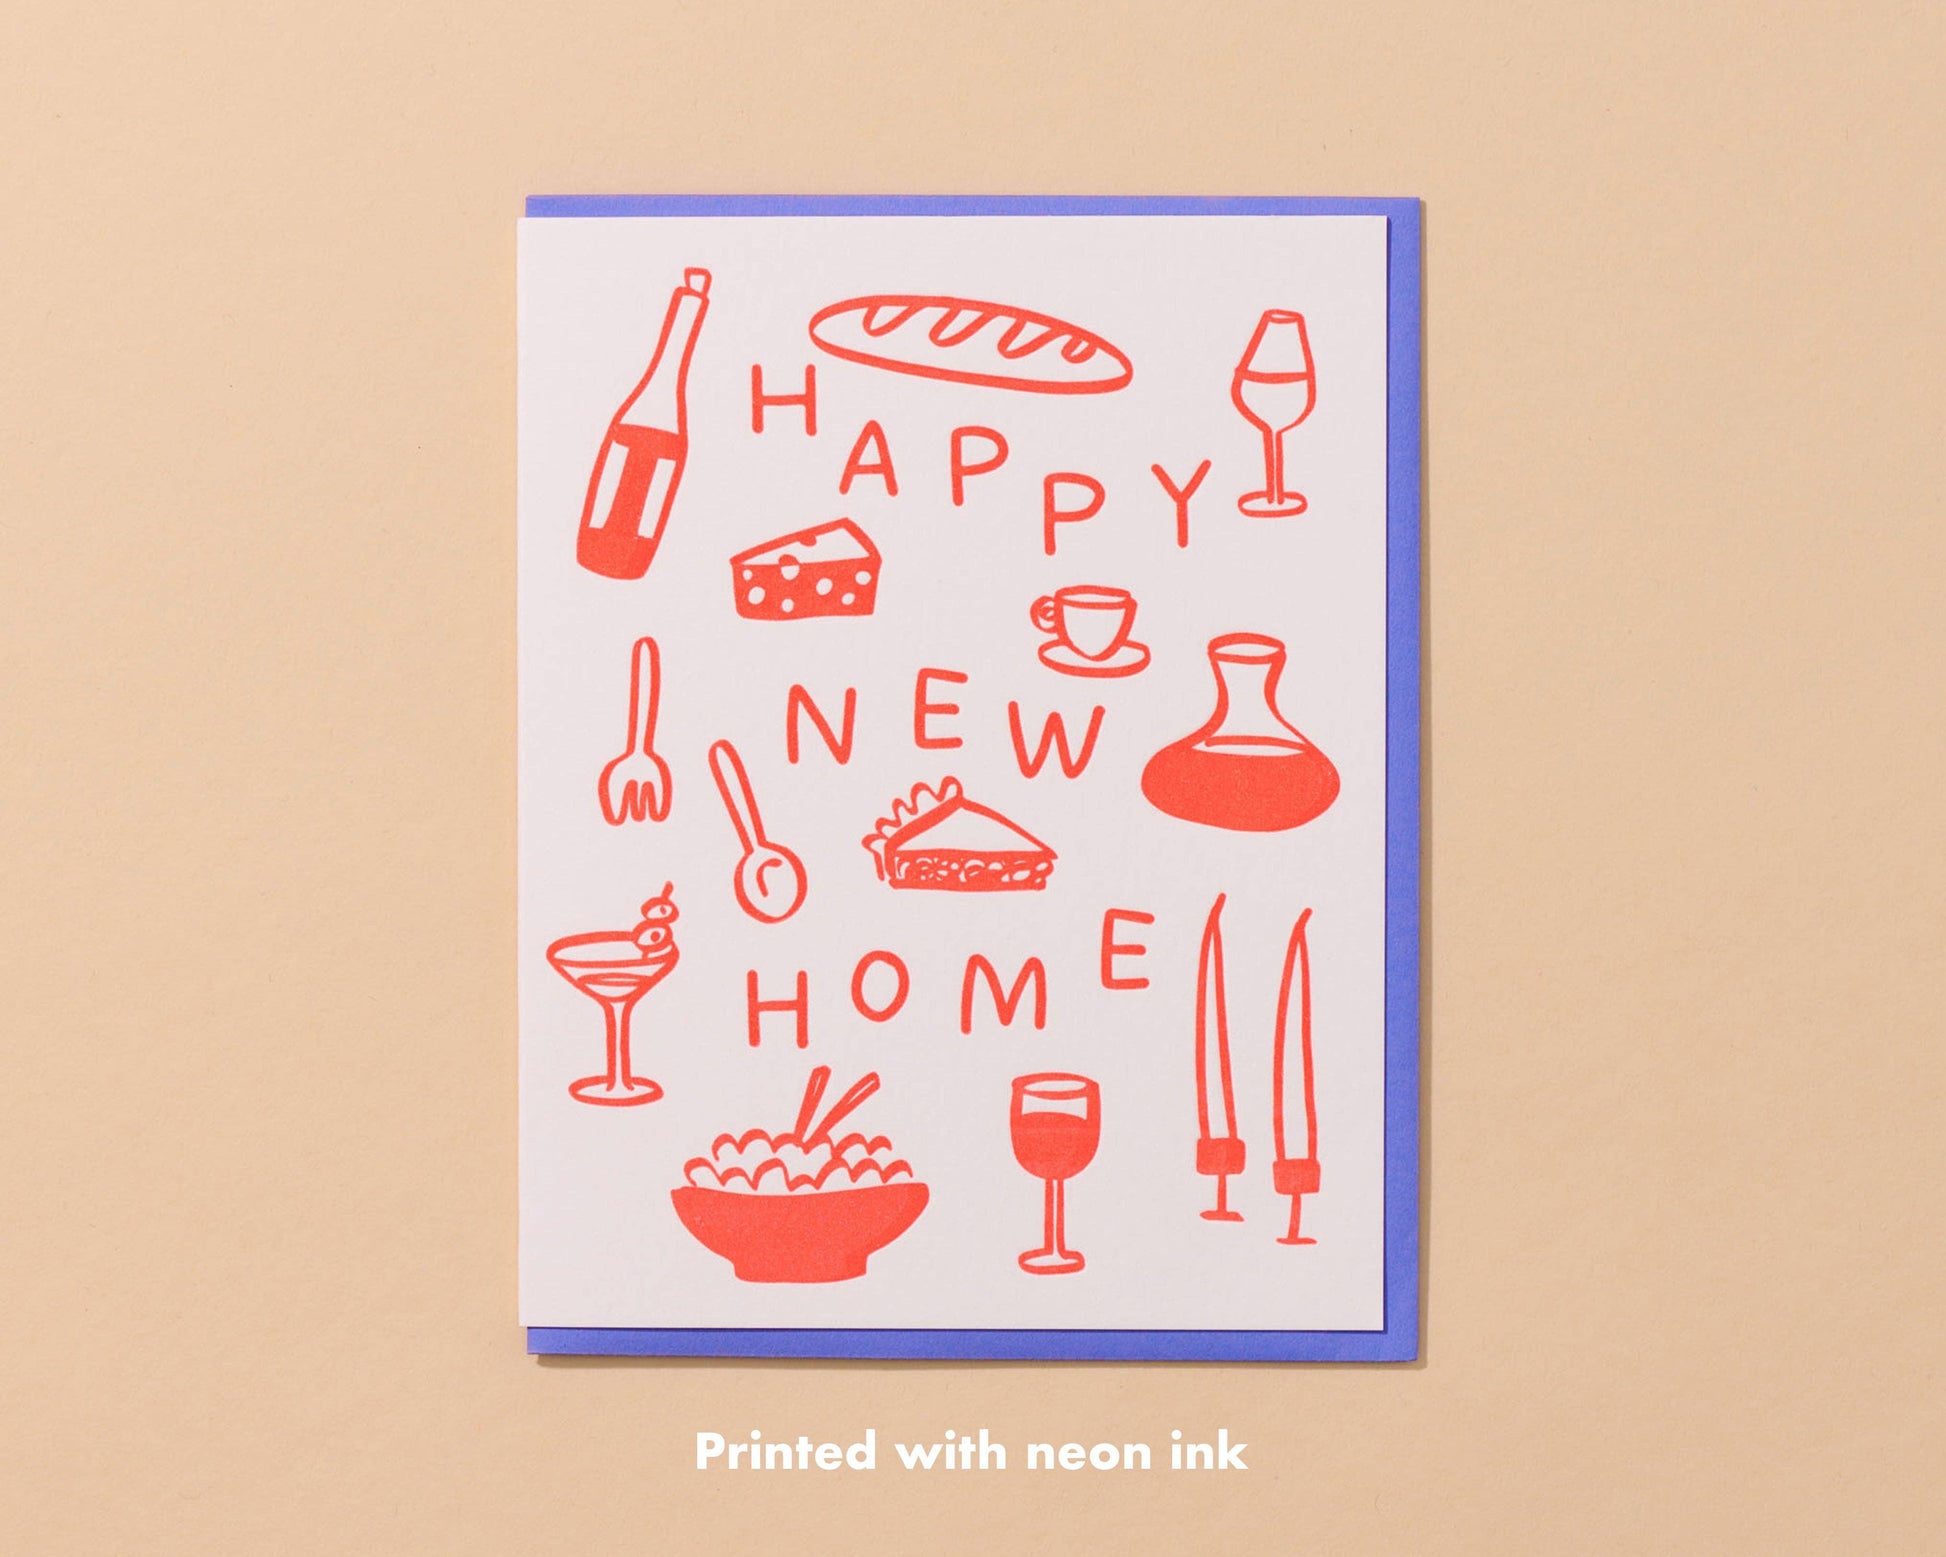 Card reads "Happy New Home" surrounded by food and drink illustrations printed in neon red ink.